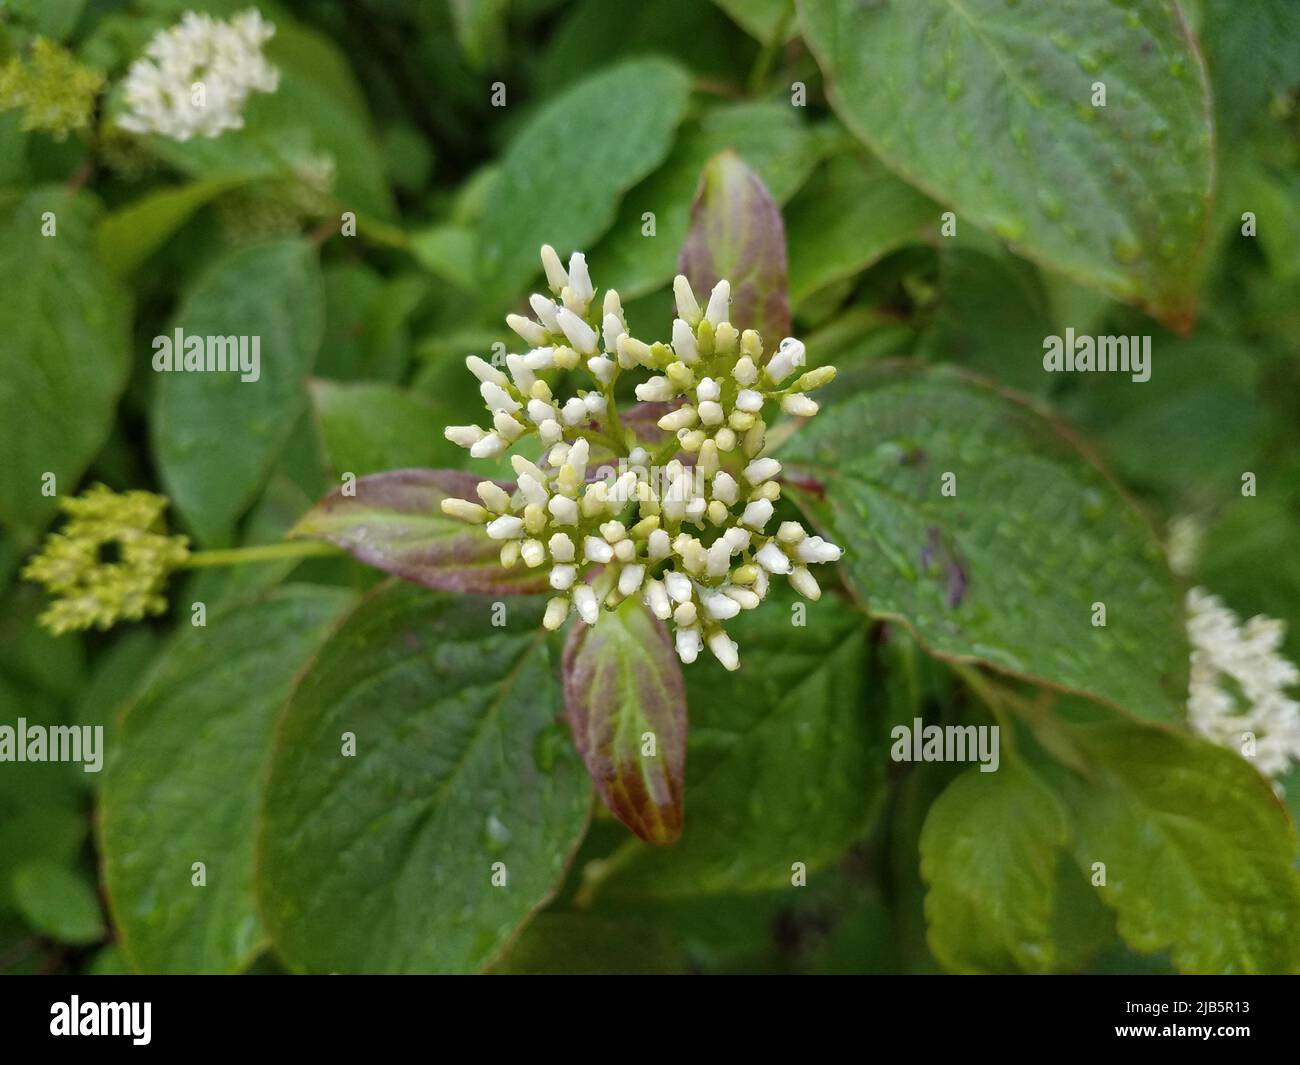 small white and wet flower blossoms and green leaves. Stock Photo